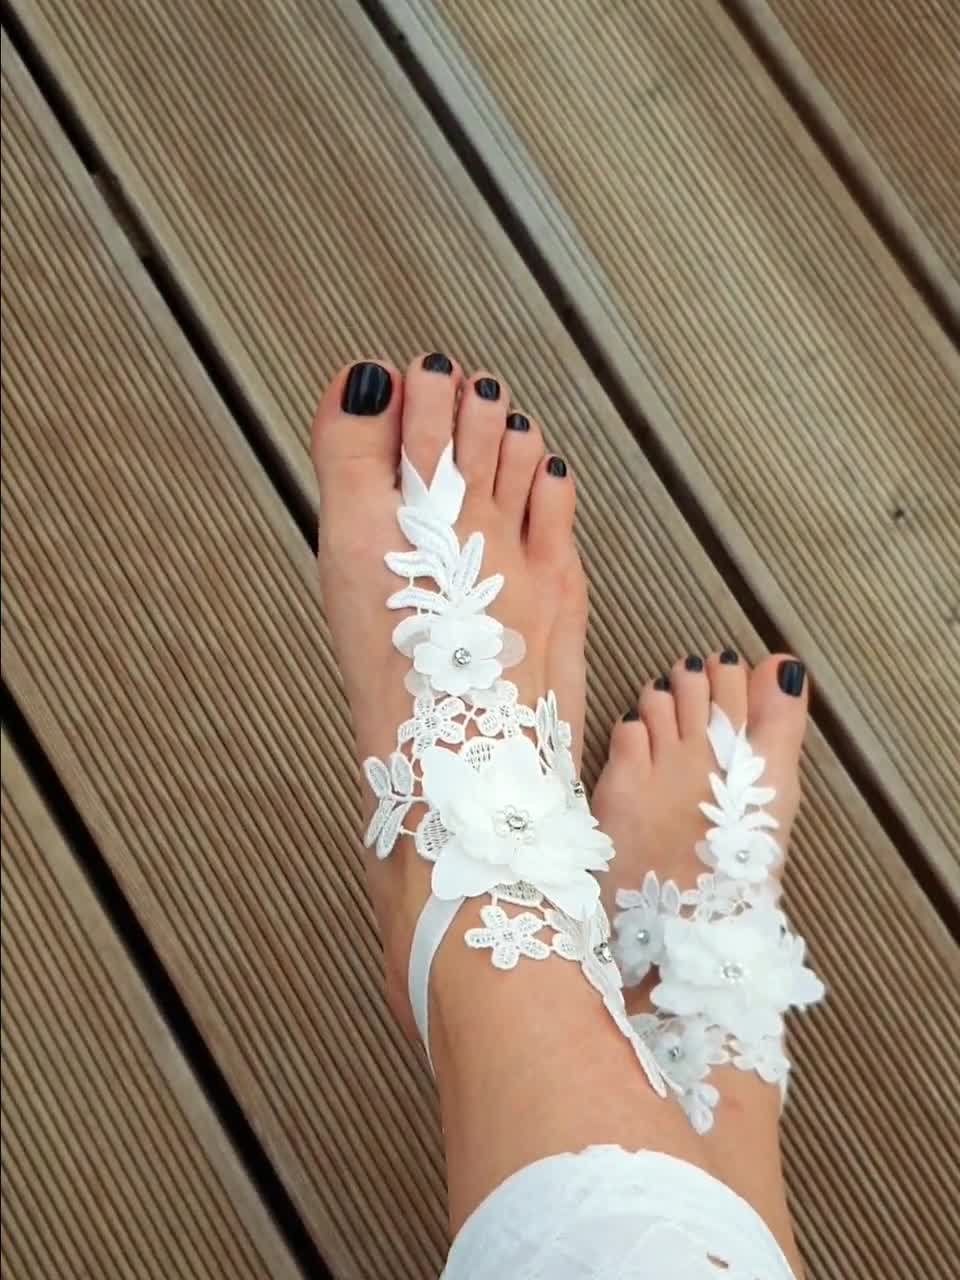 Shoes Womens Shoes Sandals Barefoot Sandals Made to measure bespoke luxury handmade barefoot boho sandals hand stitched lace crystals pearls destination beach wedding 